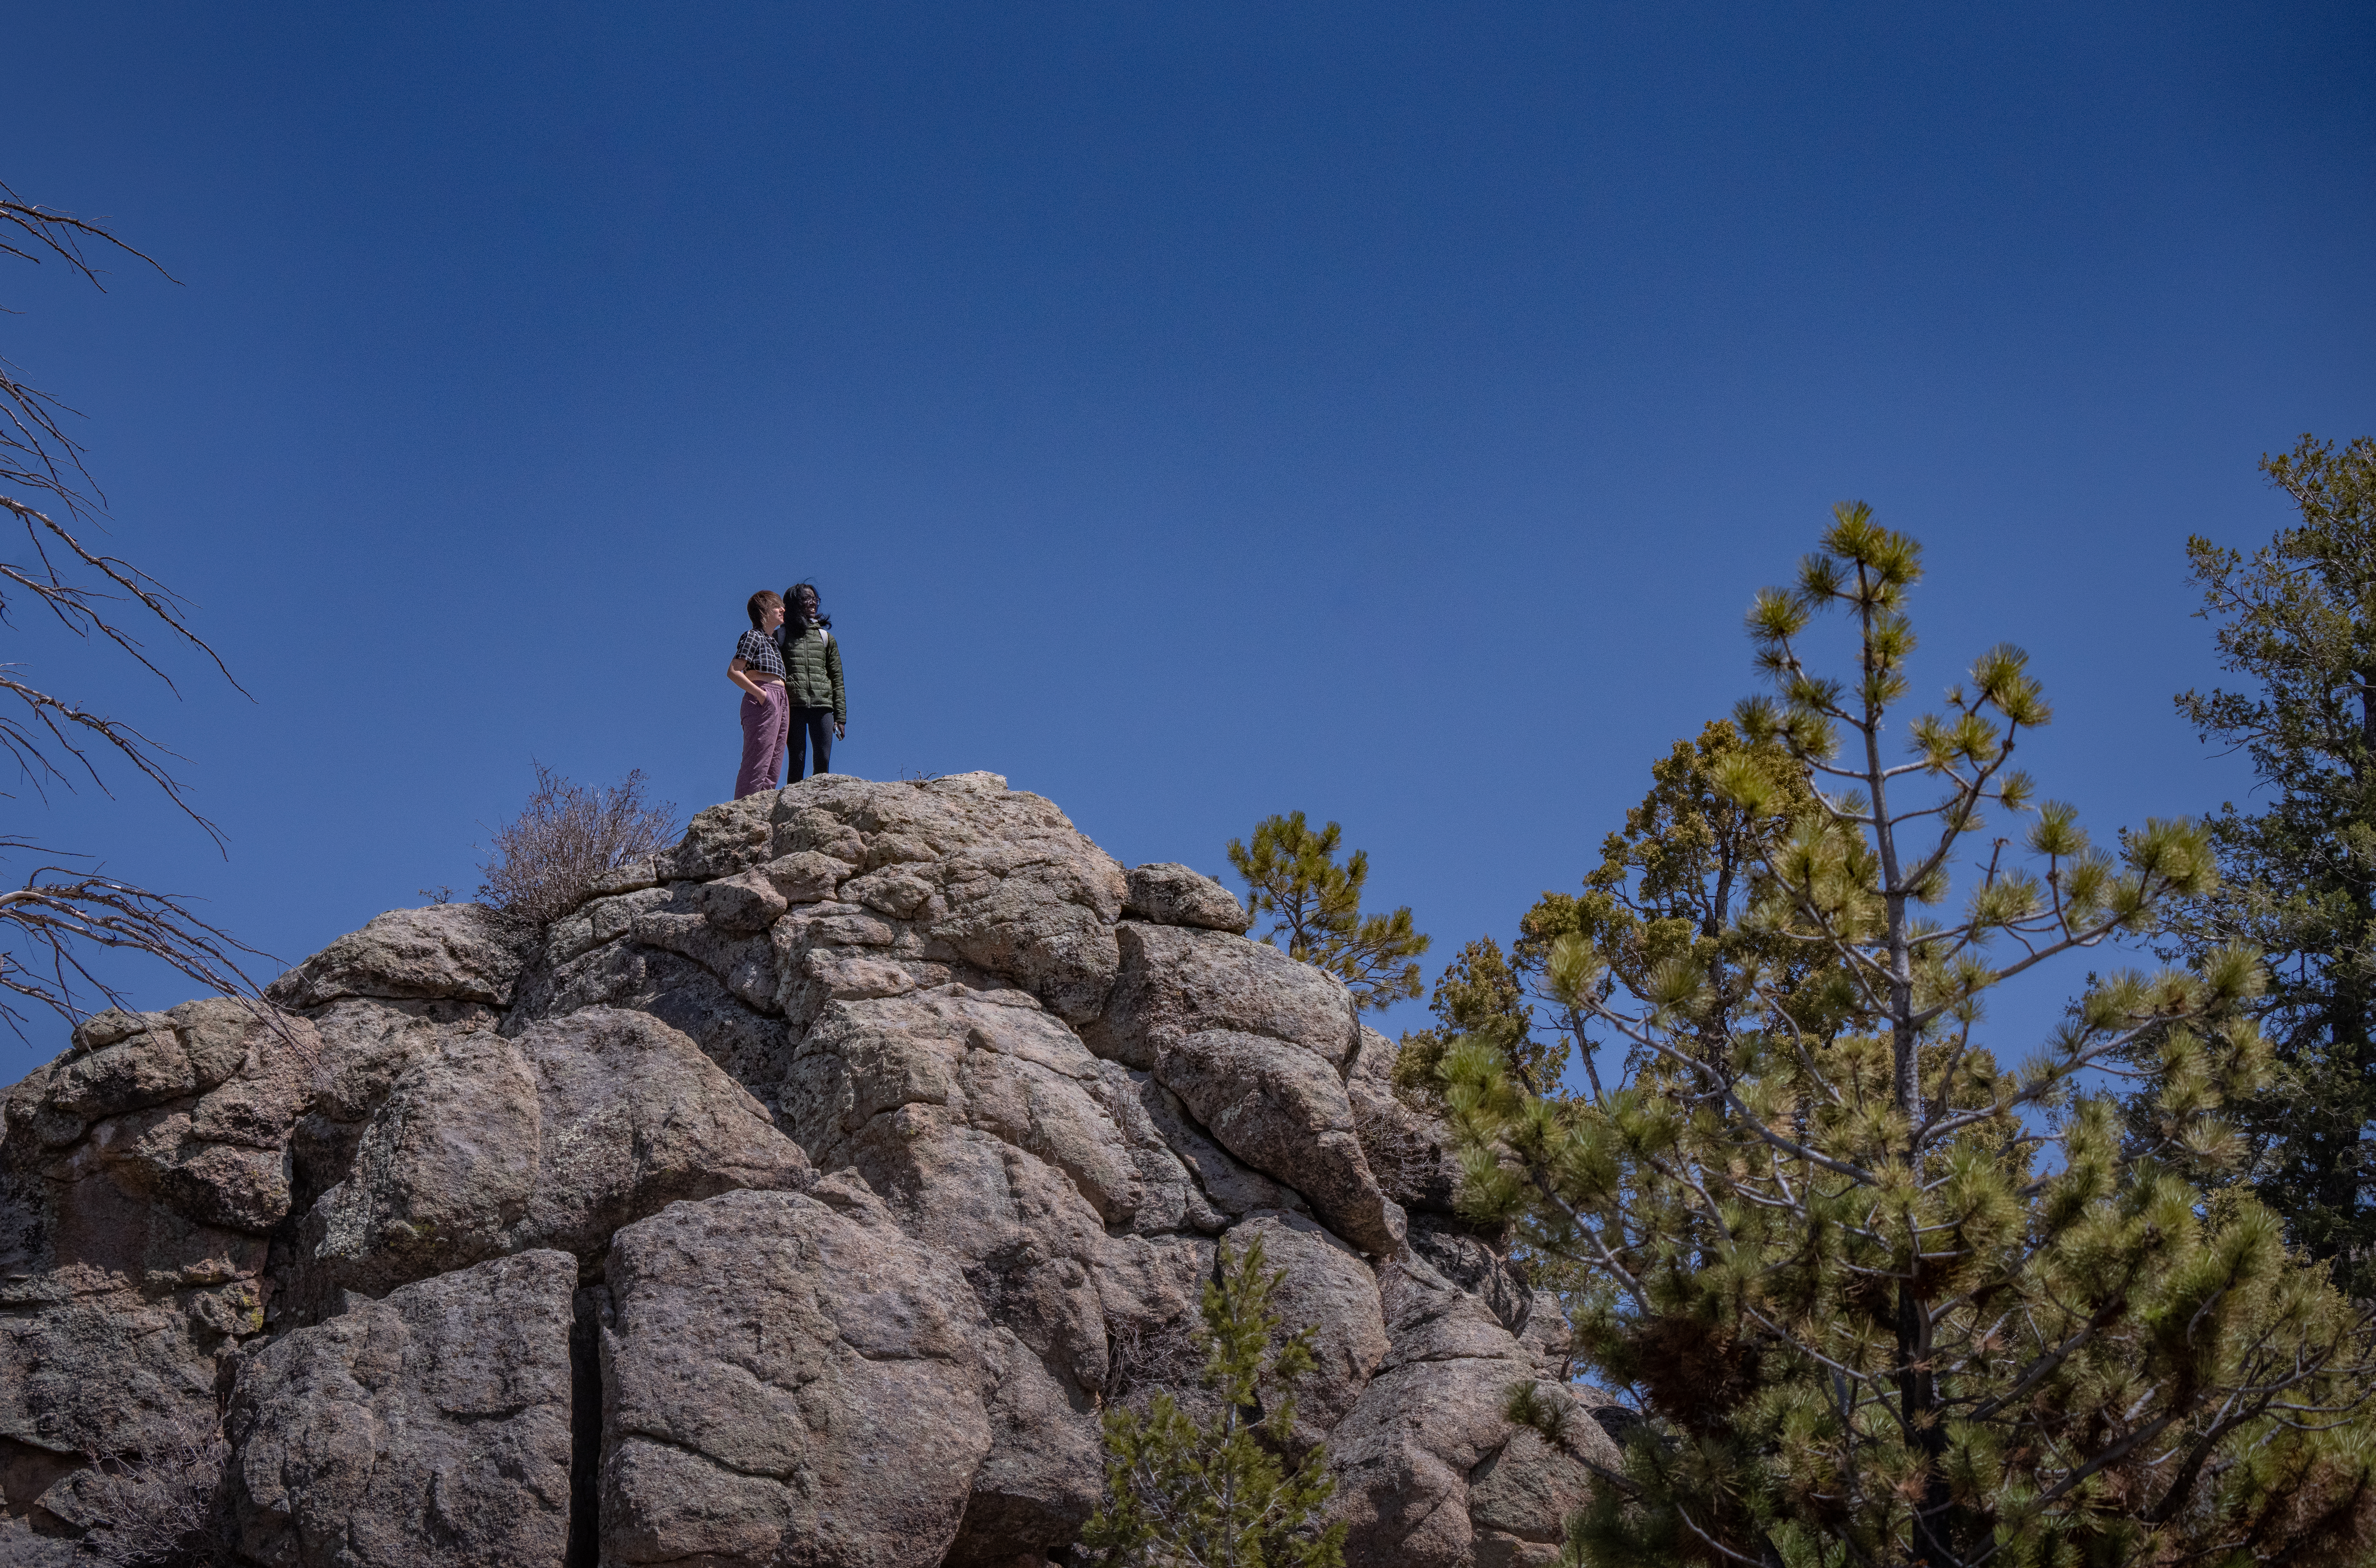 Two people stand on a rock precipice against a blue sky.